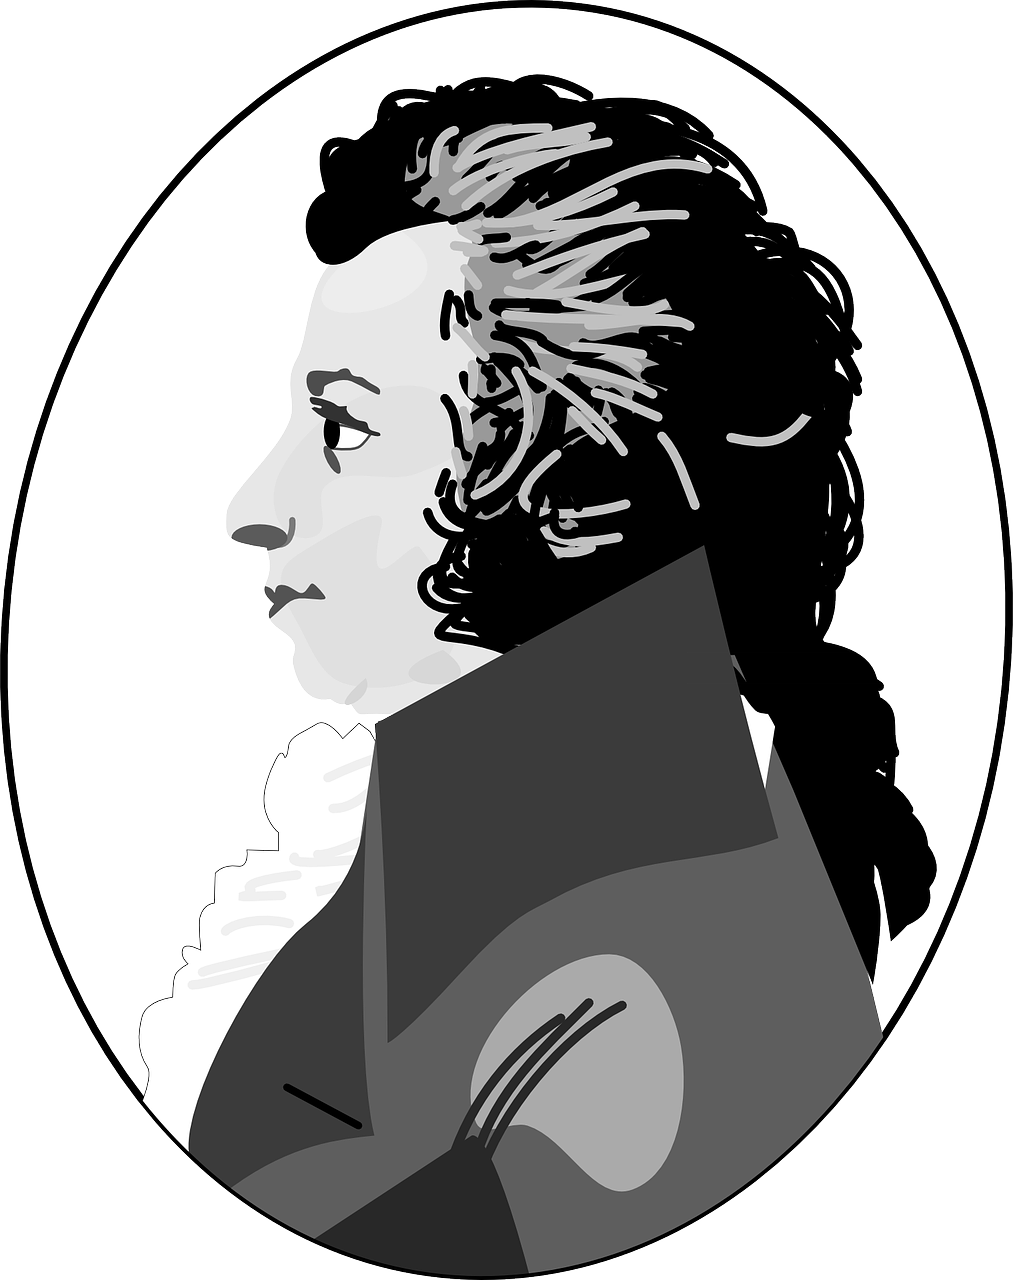 wolfgang amadeus mozart composer classical music free photo